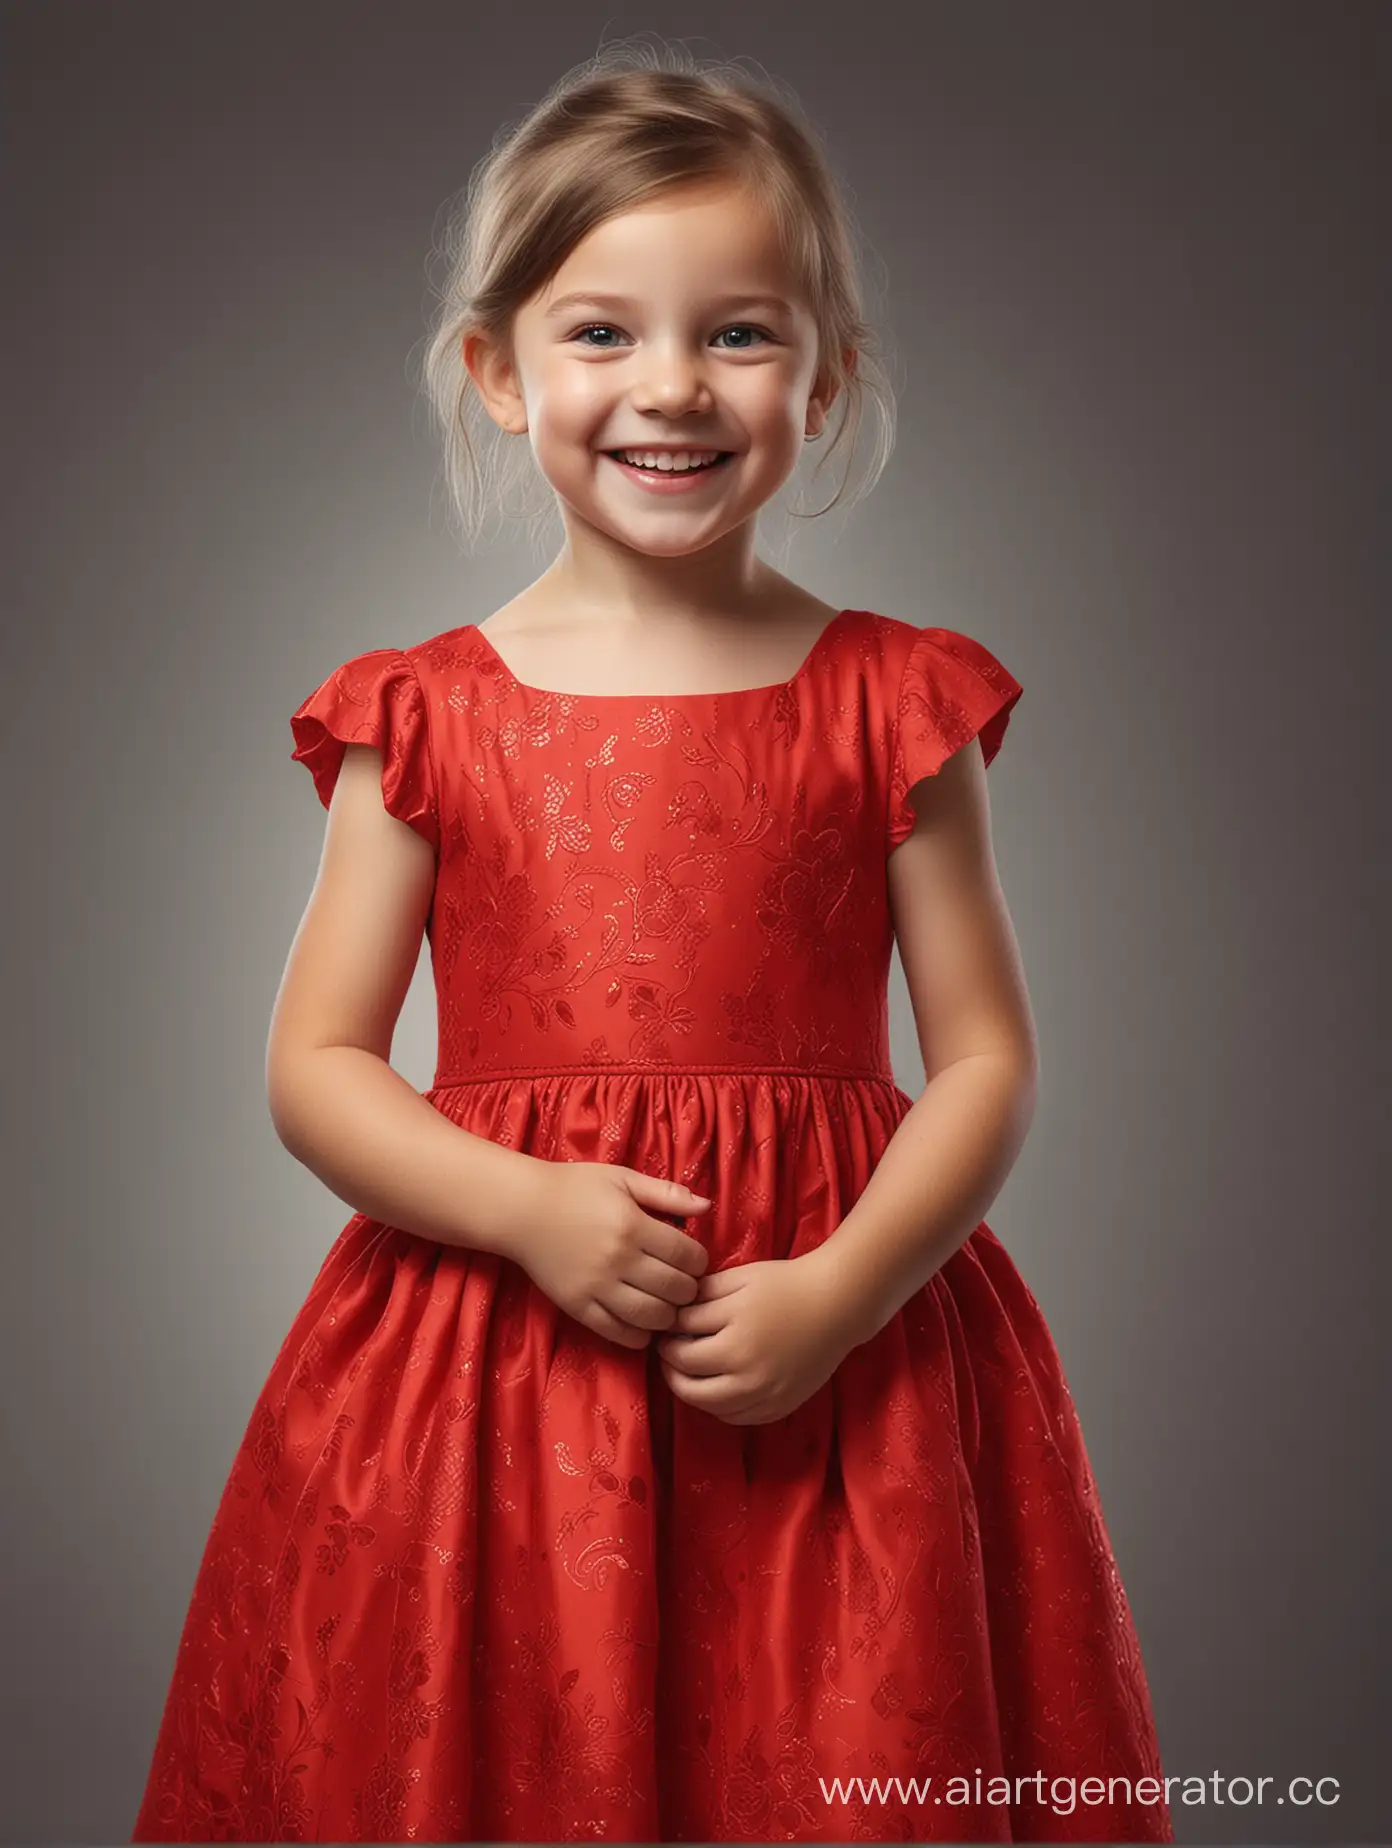 Happy-Child-in-Red-Dress-Smiling-with-High-Eye-Detail